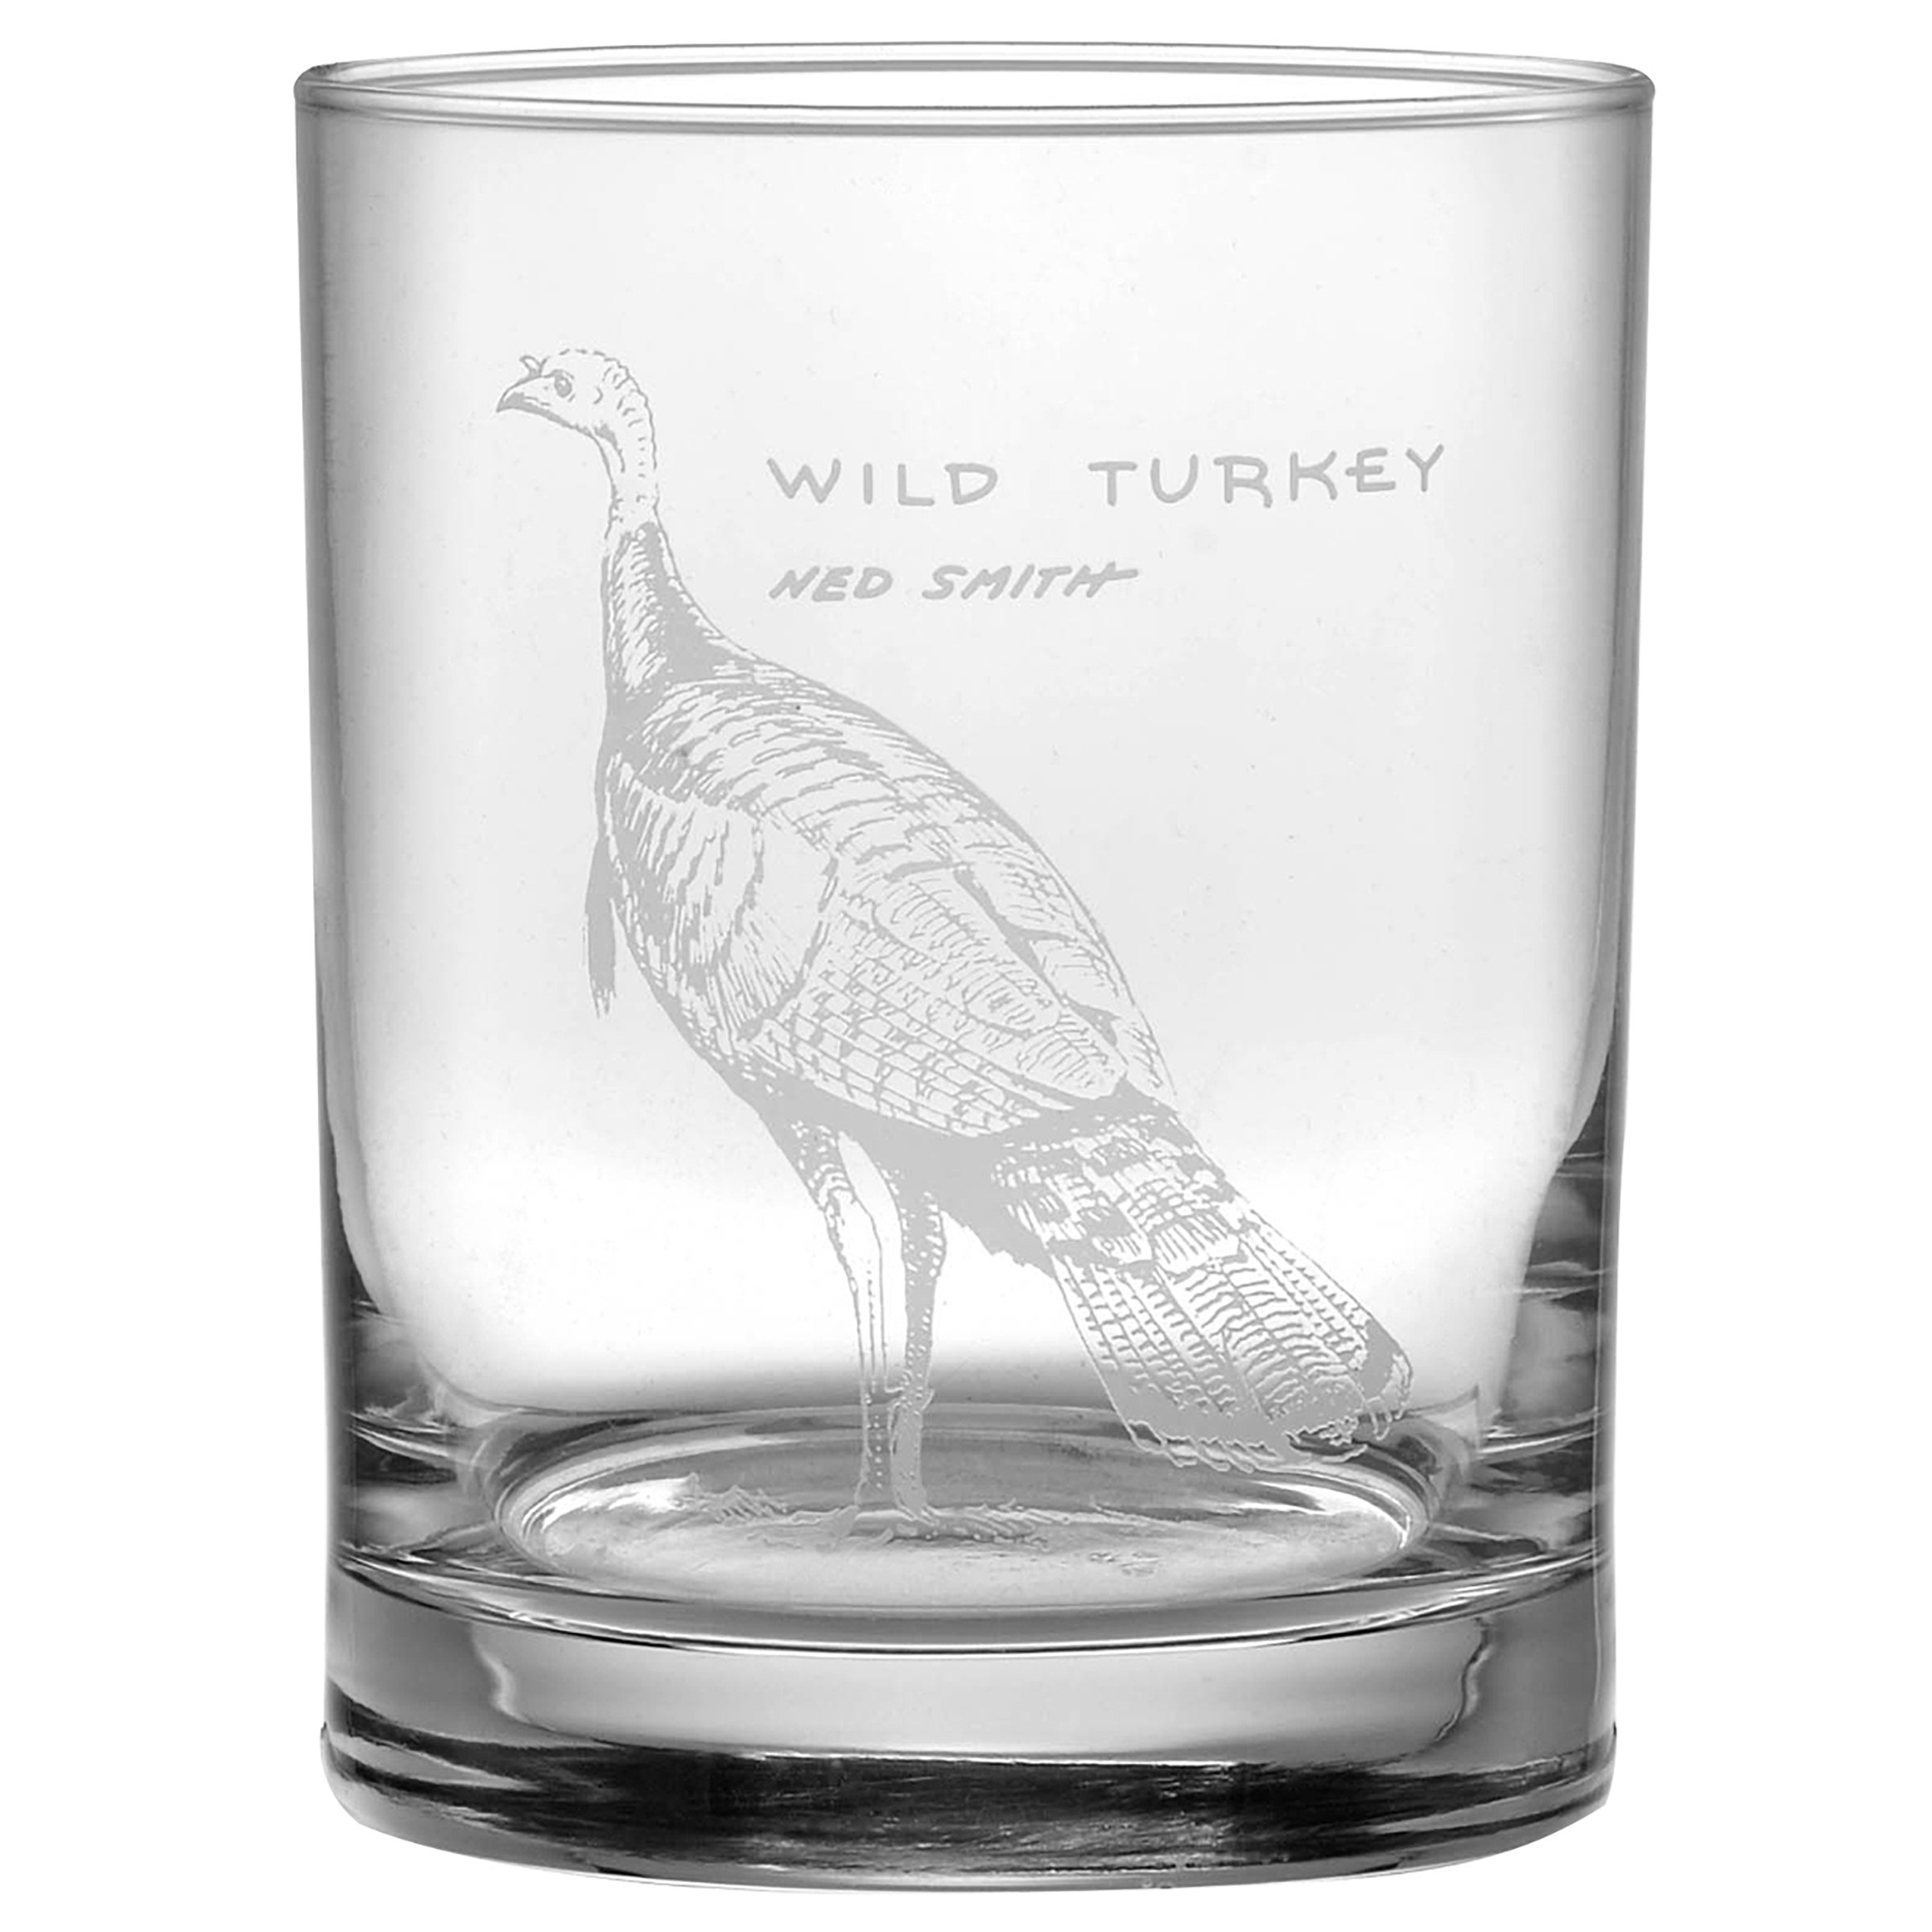 Culver Ned Smith Upland Gamebirds 14-Ounce (DOF) Double Old Fashioned Glass Assorted Set of 4